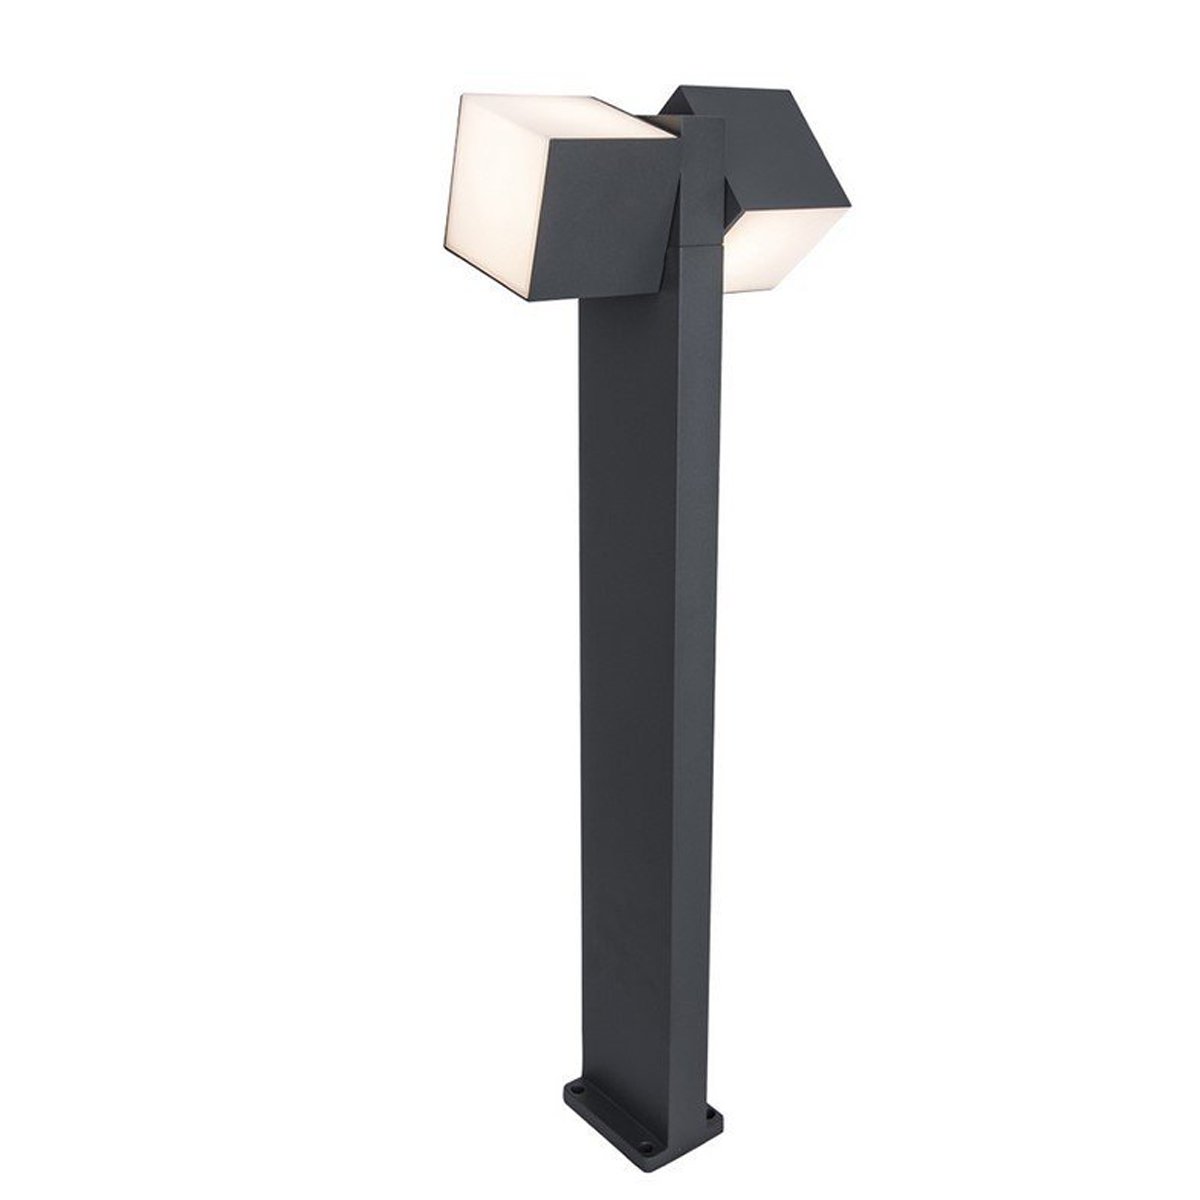 Come browse our Morgan dark grey double cube outdoor post light by CGC Interiors. This cube light installed in your home’s exterior space, creating an atmospheric lighting system for your garden, front door, or driveway to provide style and an extra security solution. The clever construction of this light allows you to adjust the light to your desired style and light output.